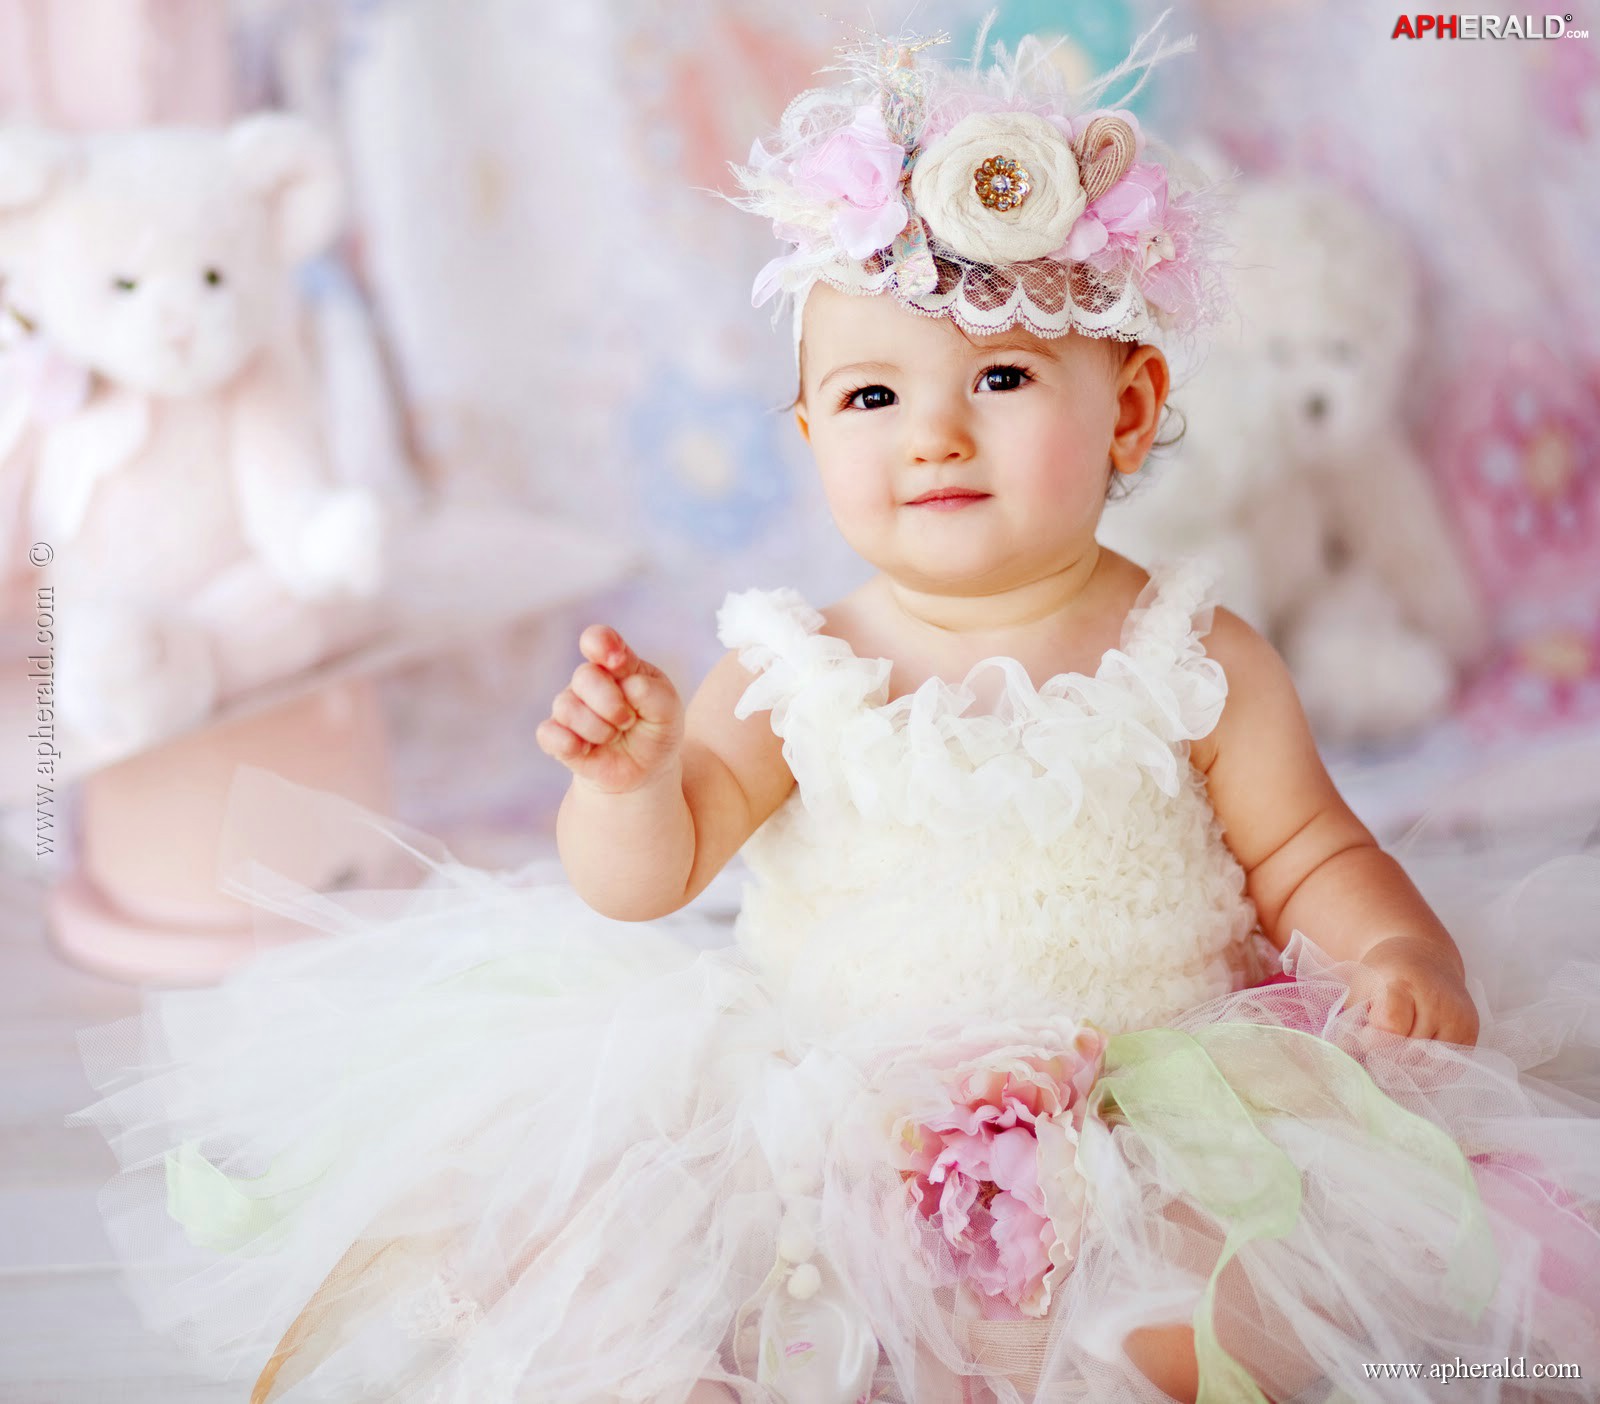 Baby Wallpaper And Background Image - Lovely Baby Girls , HD Wallpaper & Backgrounds